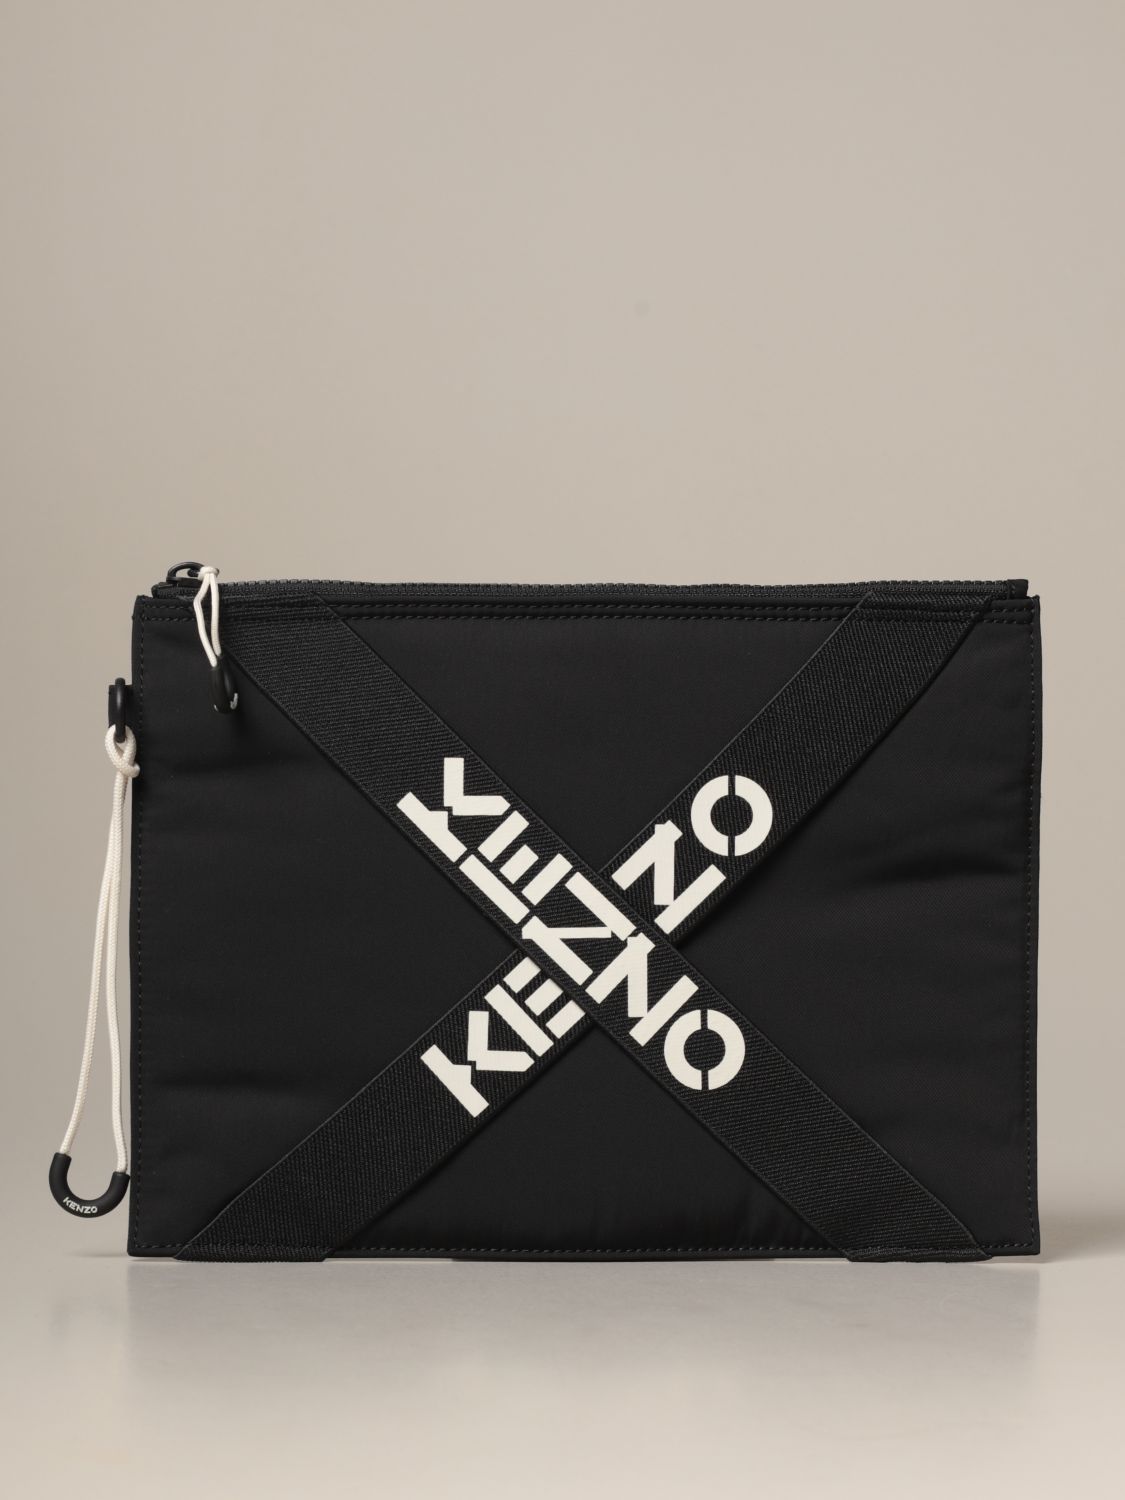 KENZO SPORT CLUTCH BAG IN NYLON WITH CROSSED BANDS,B45659002